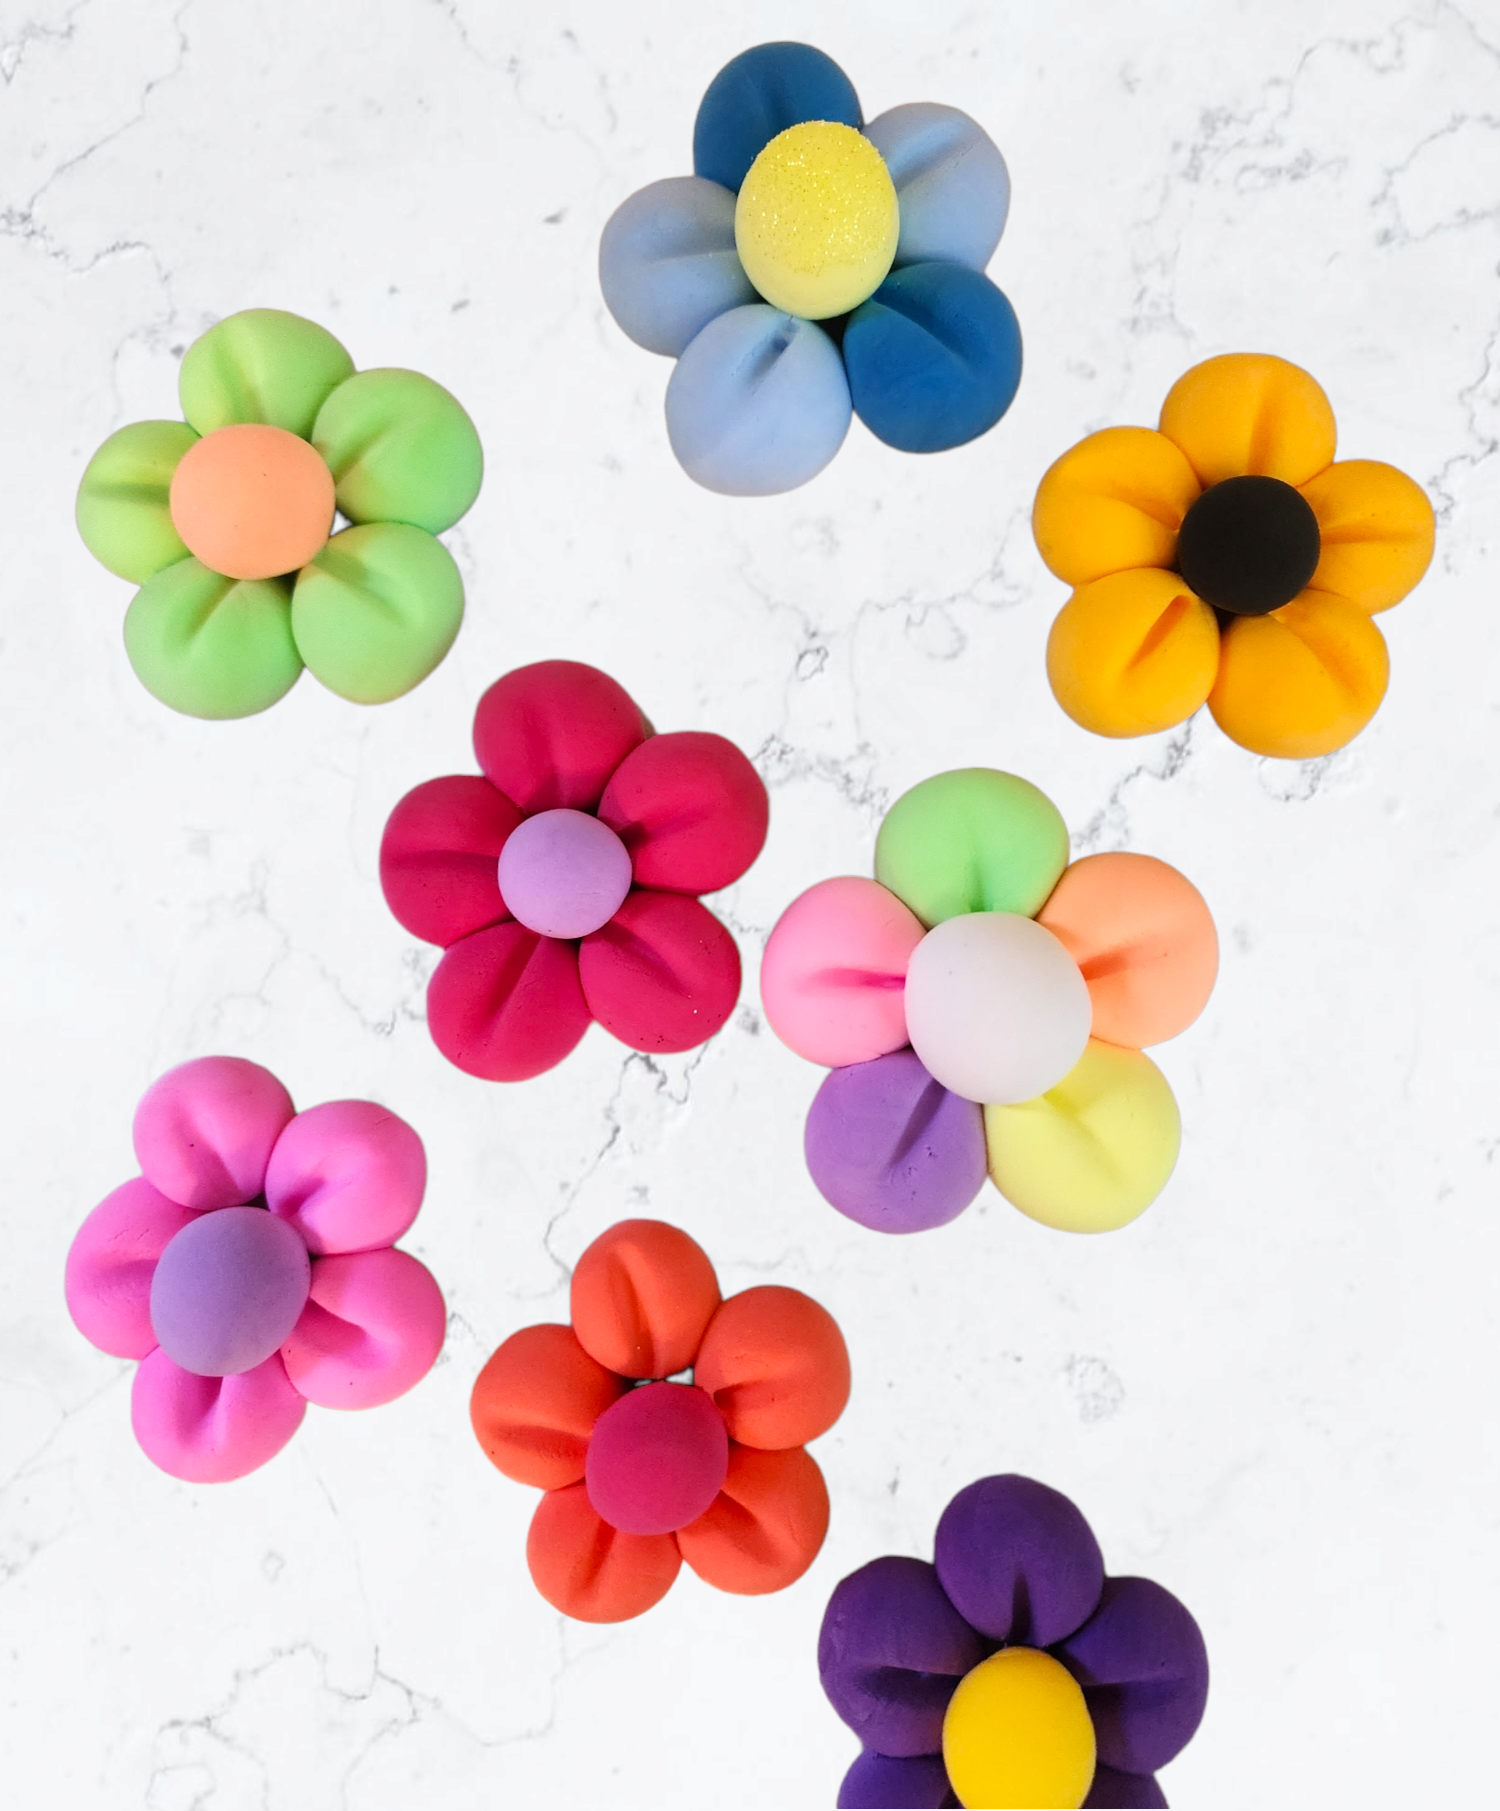 JUST FLOWERS Handmade Clay Flowers for Mirrors, Vanity, Canvas